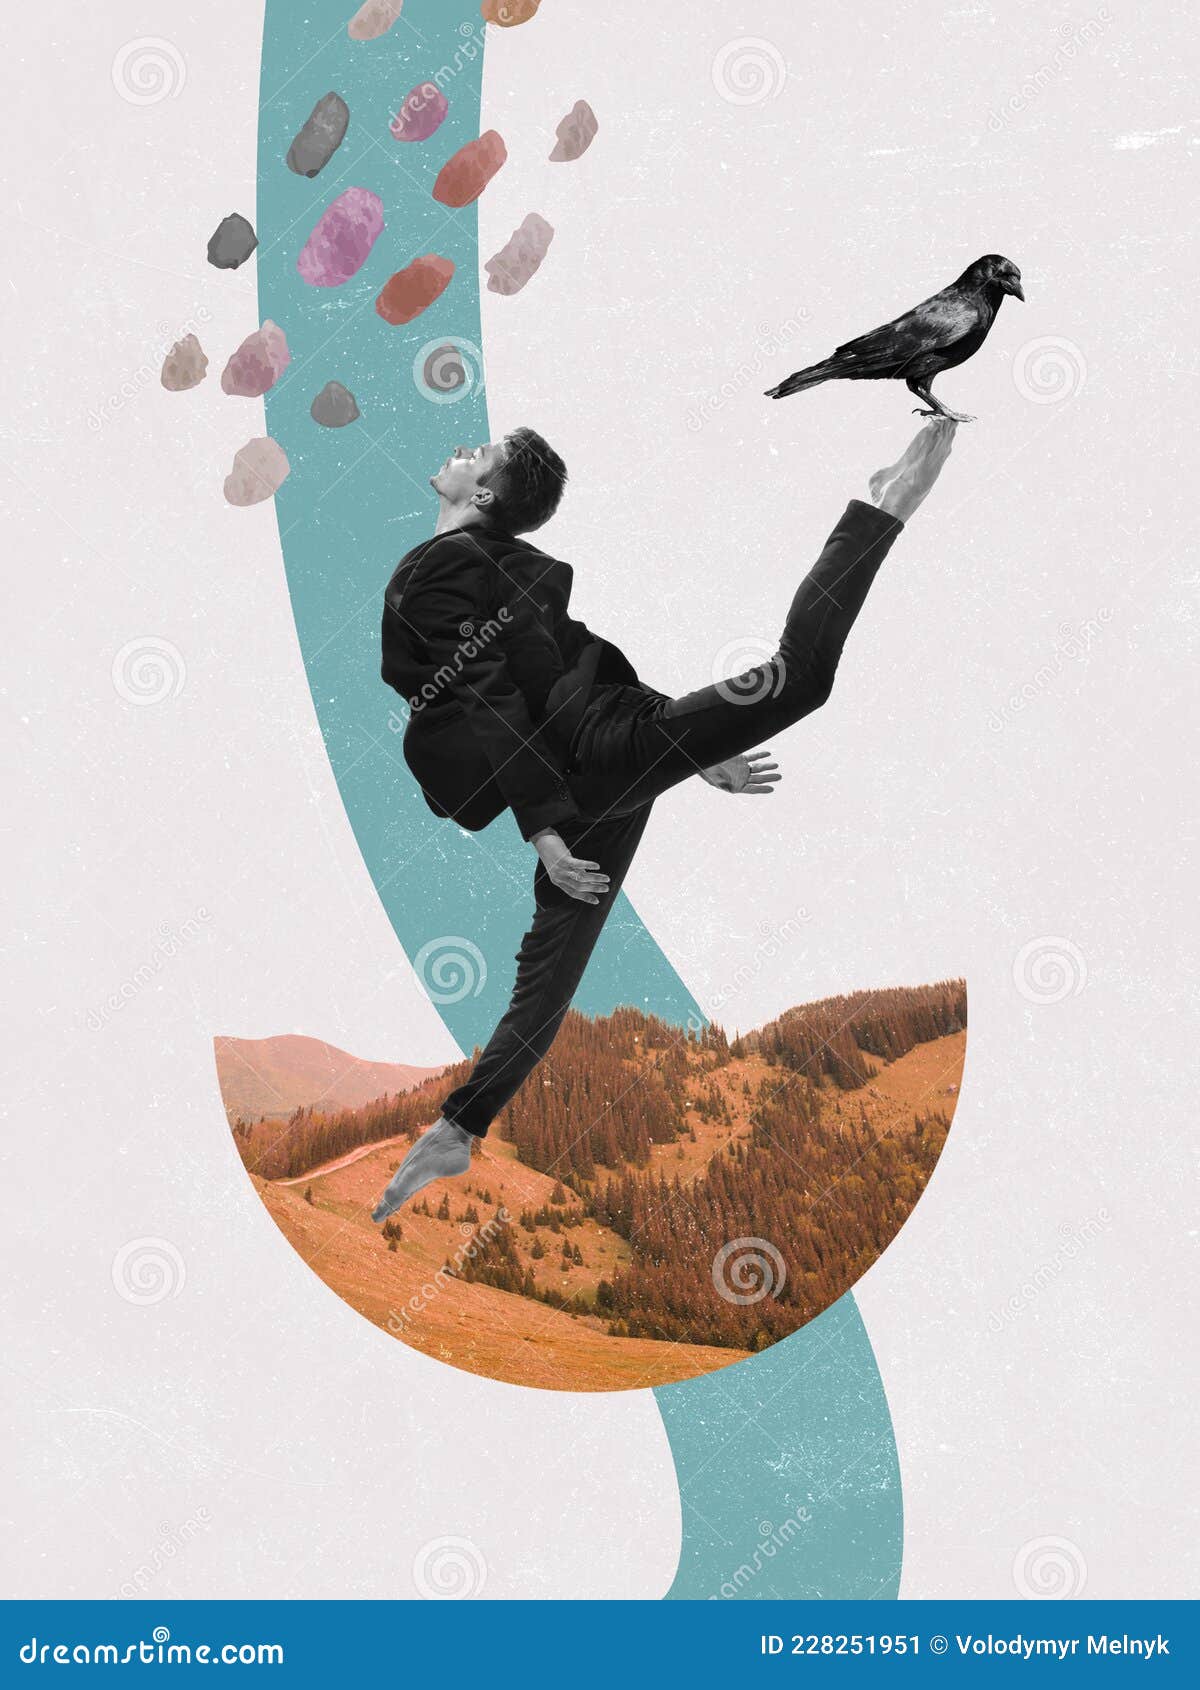 modern , contemporary art collage. inspiration, idea, trendy urban magazine style. young man dancing with bird on